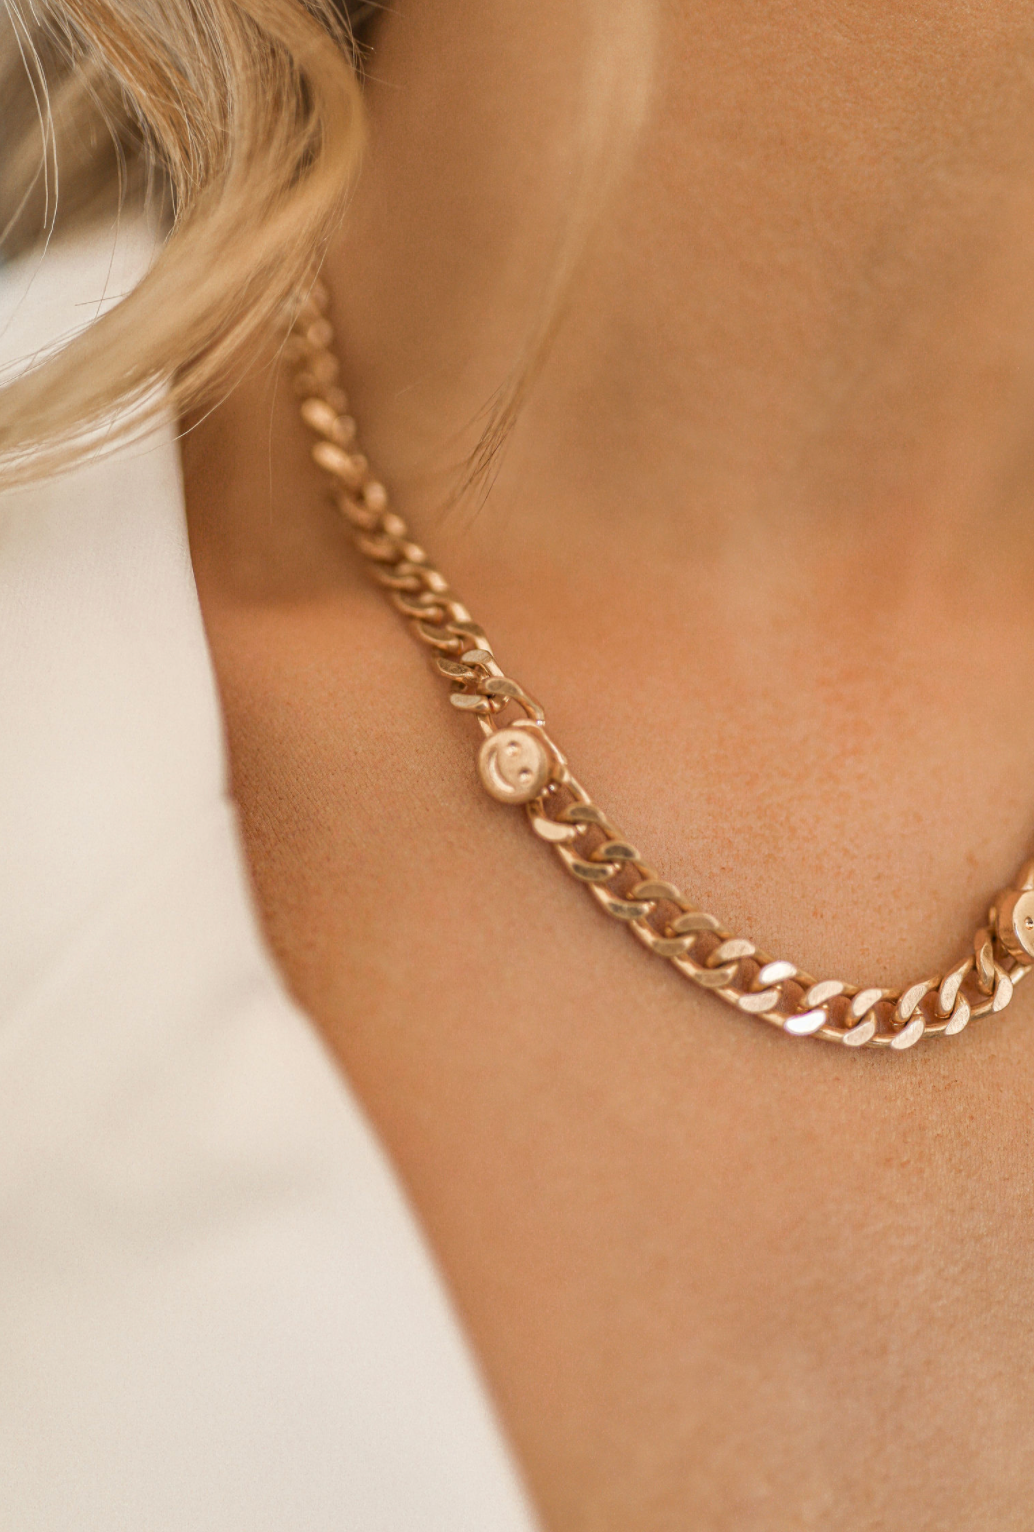 All Smiles Gold Chain Necklace